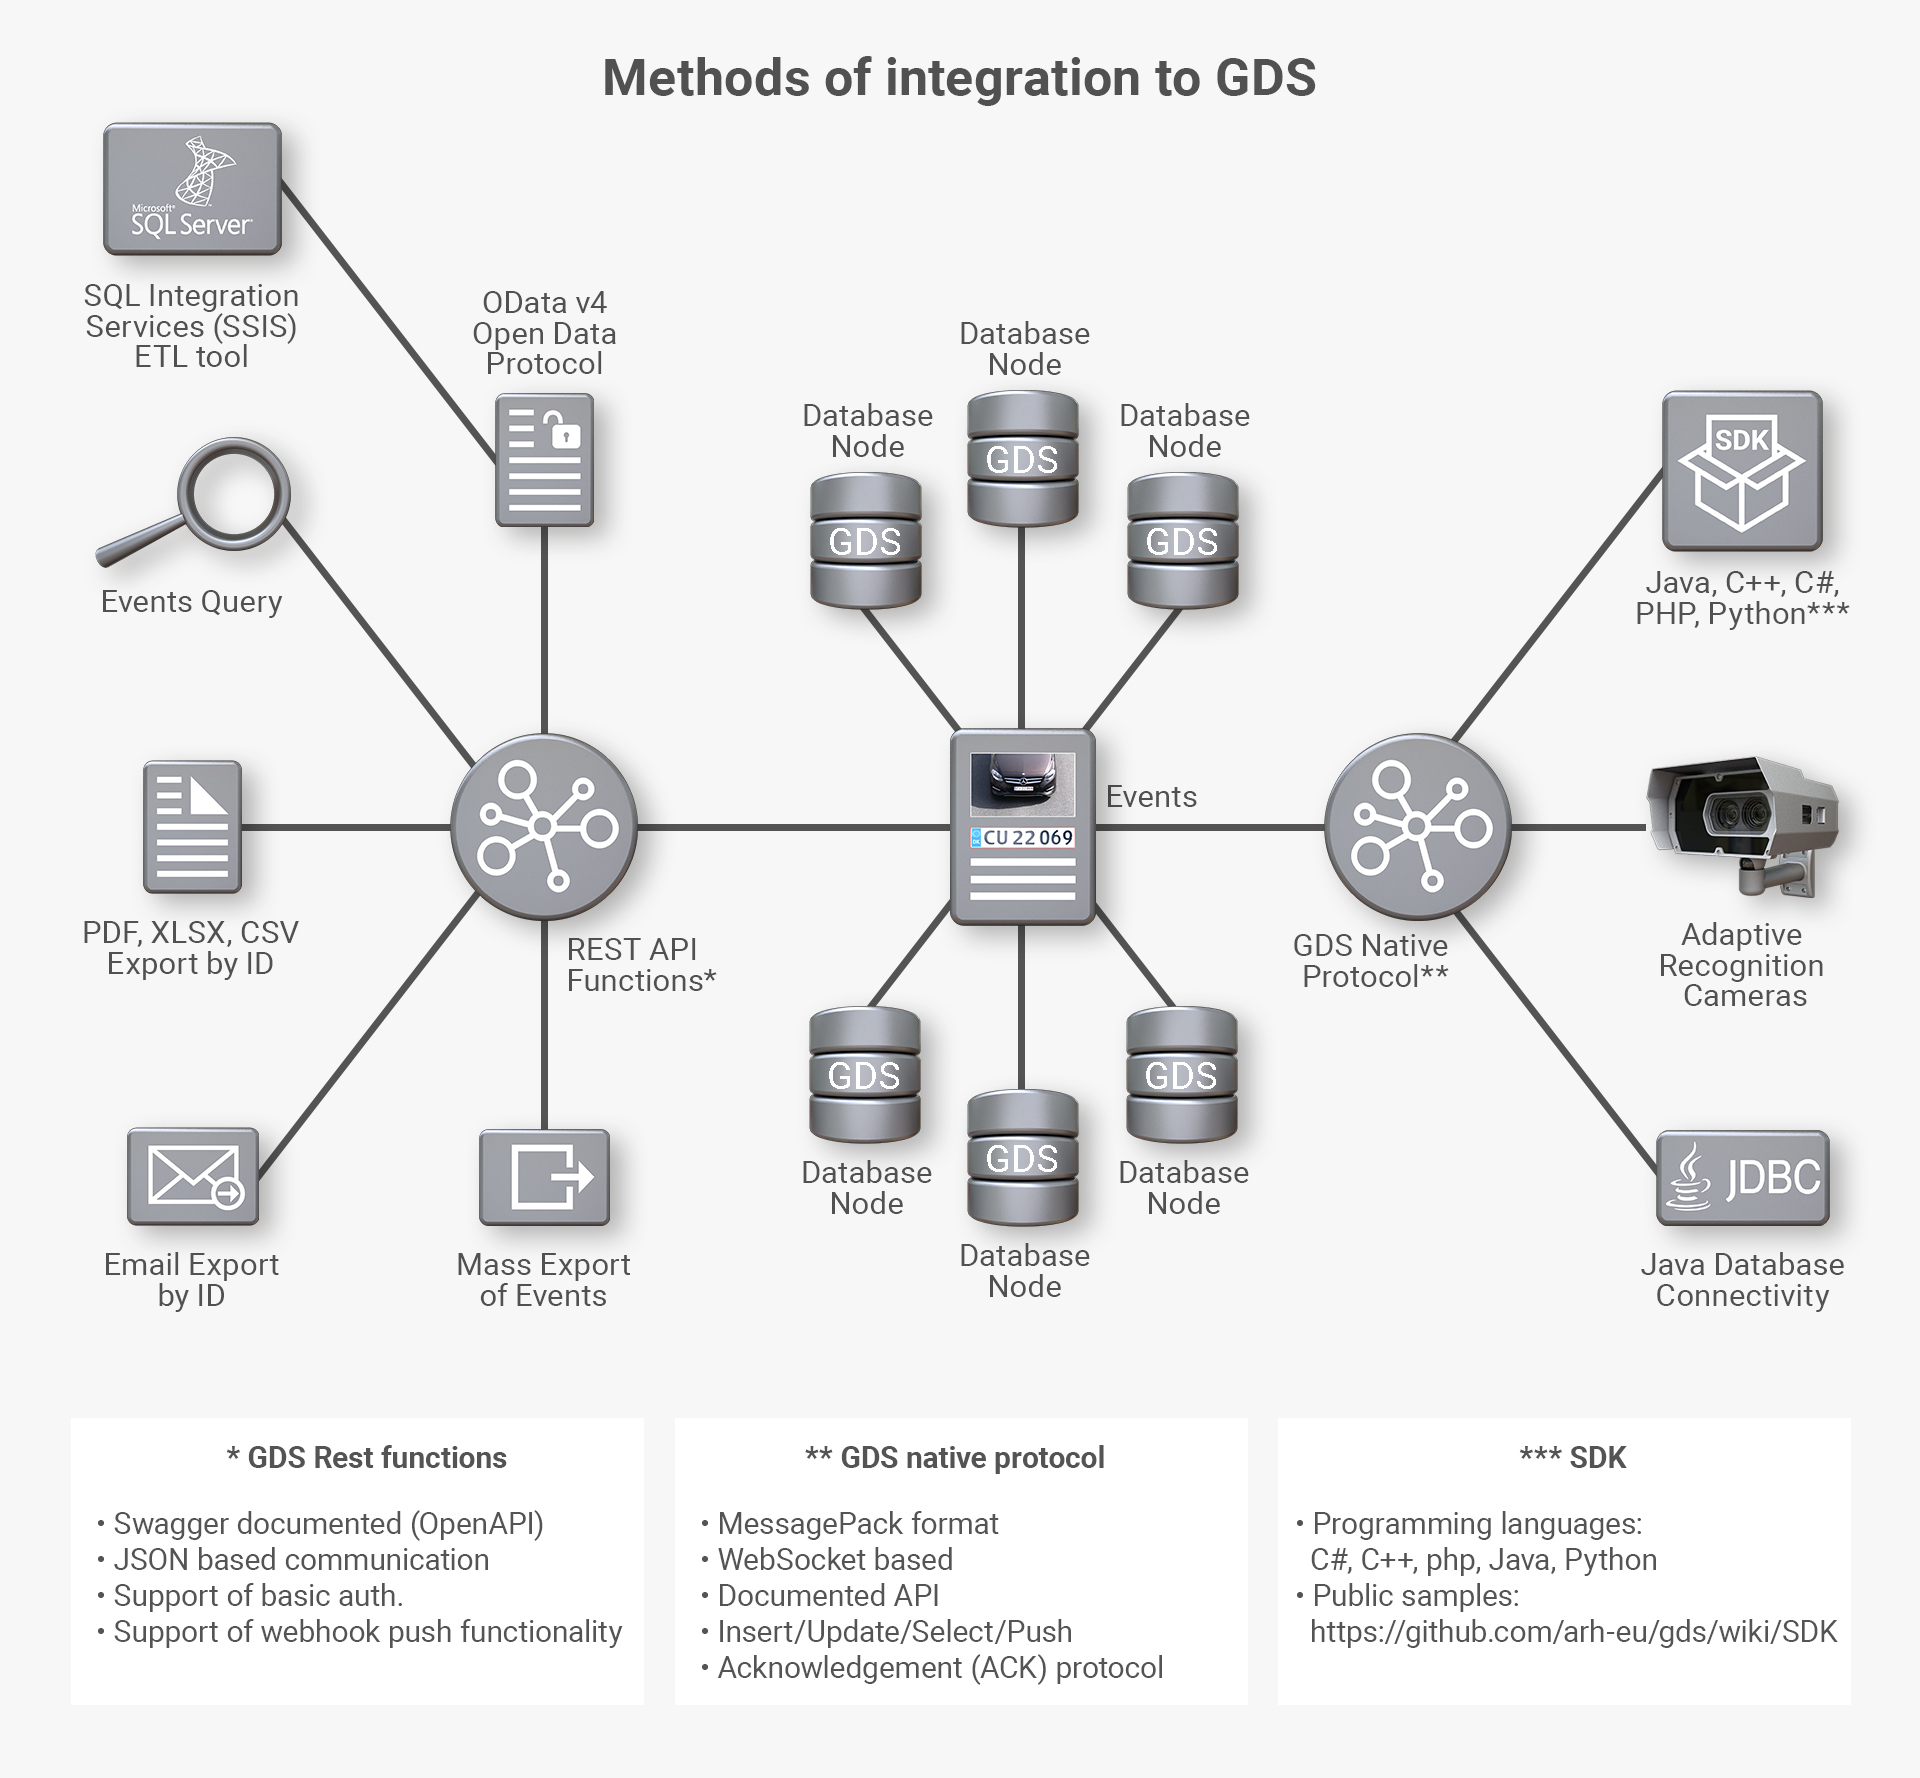 Adaptive Recognition Methods of integration to GDS